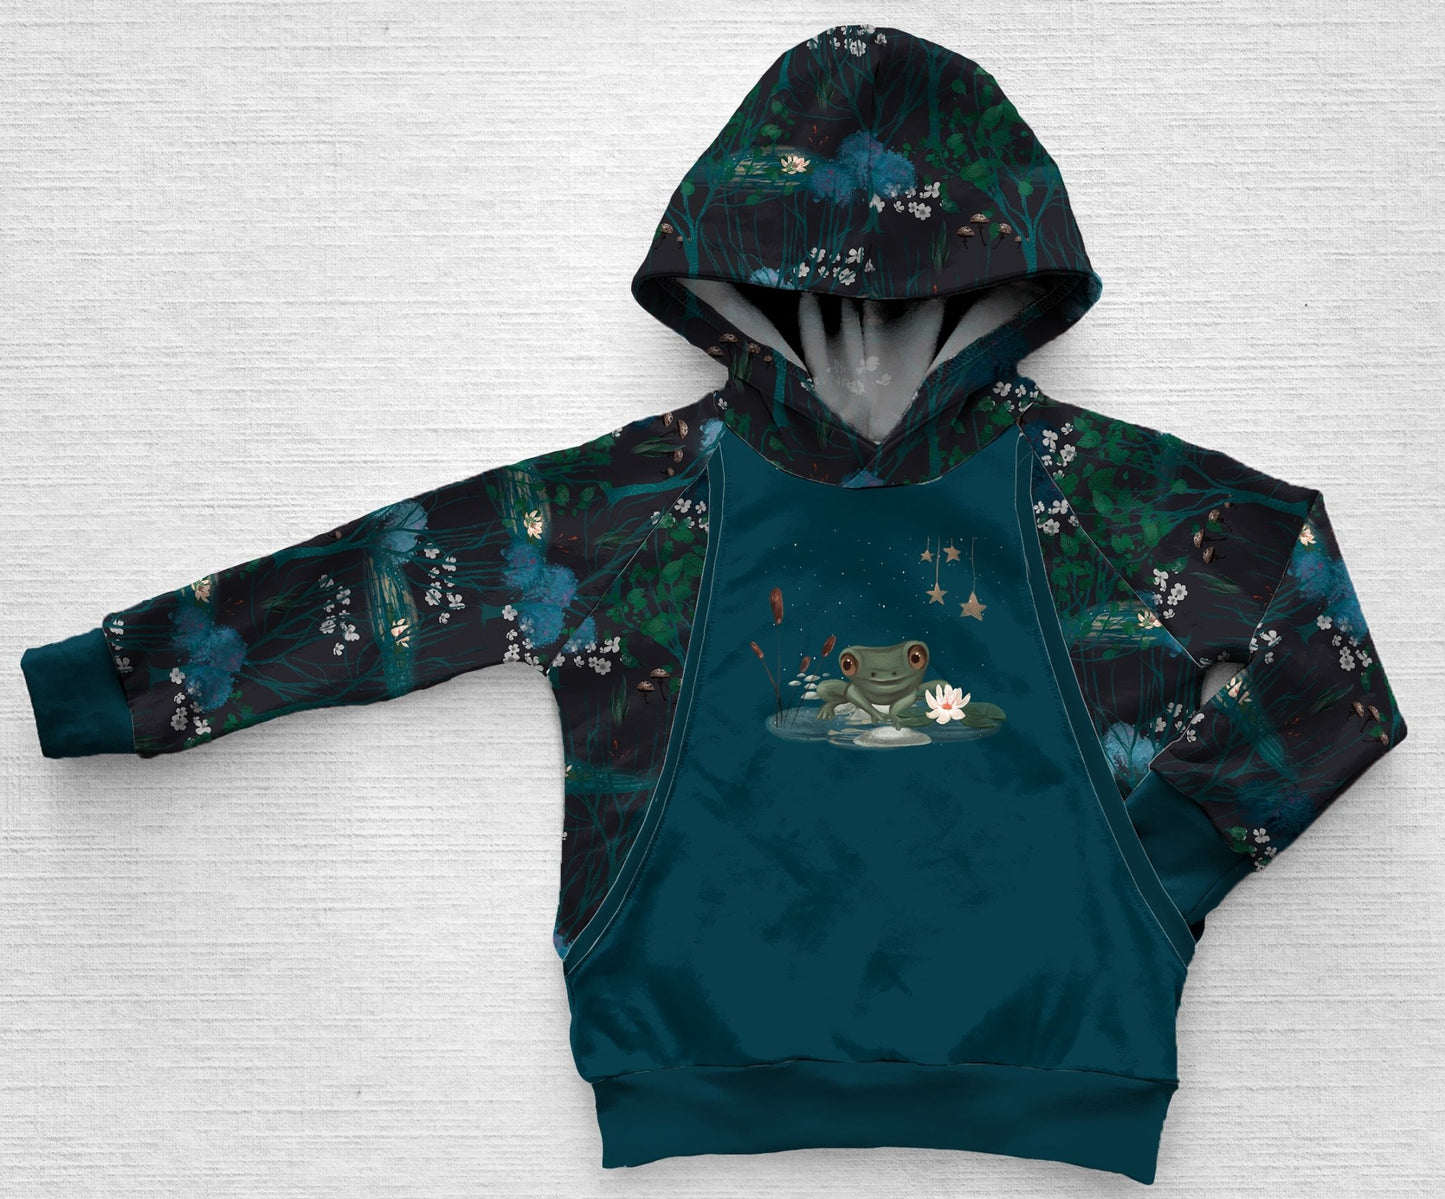 A dark blue hoodie of a frog in a forest frog pond at night